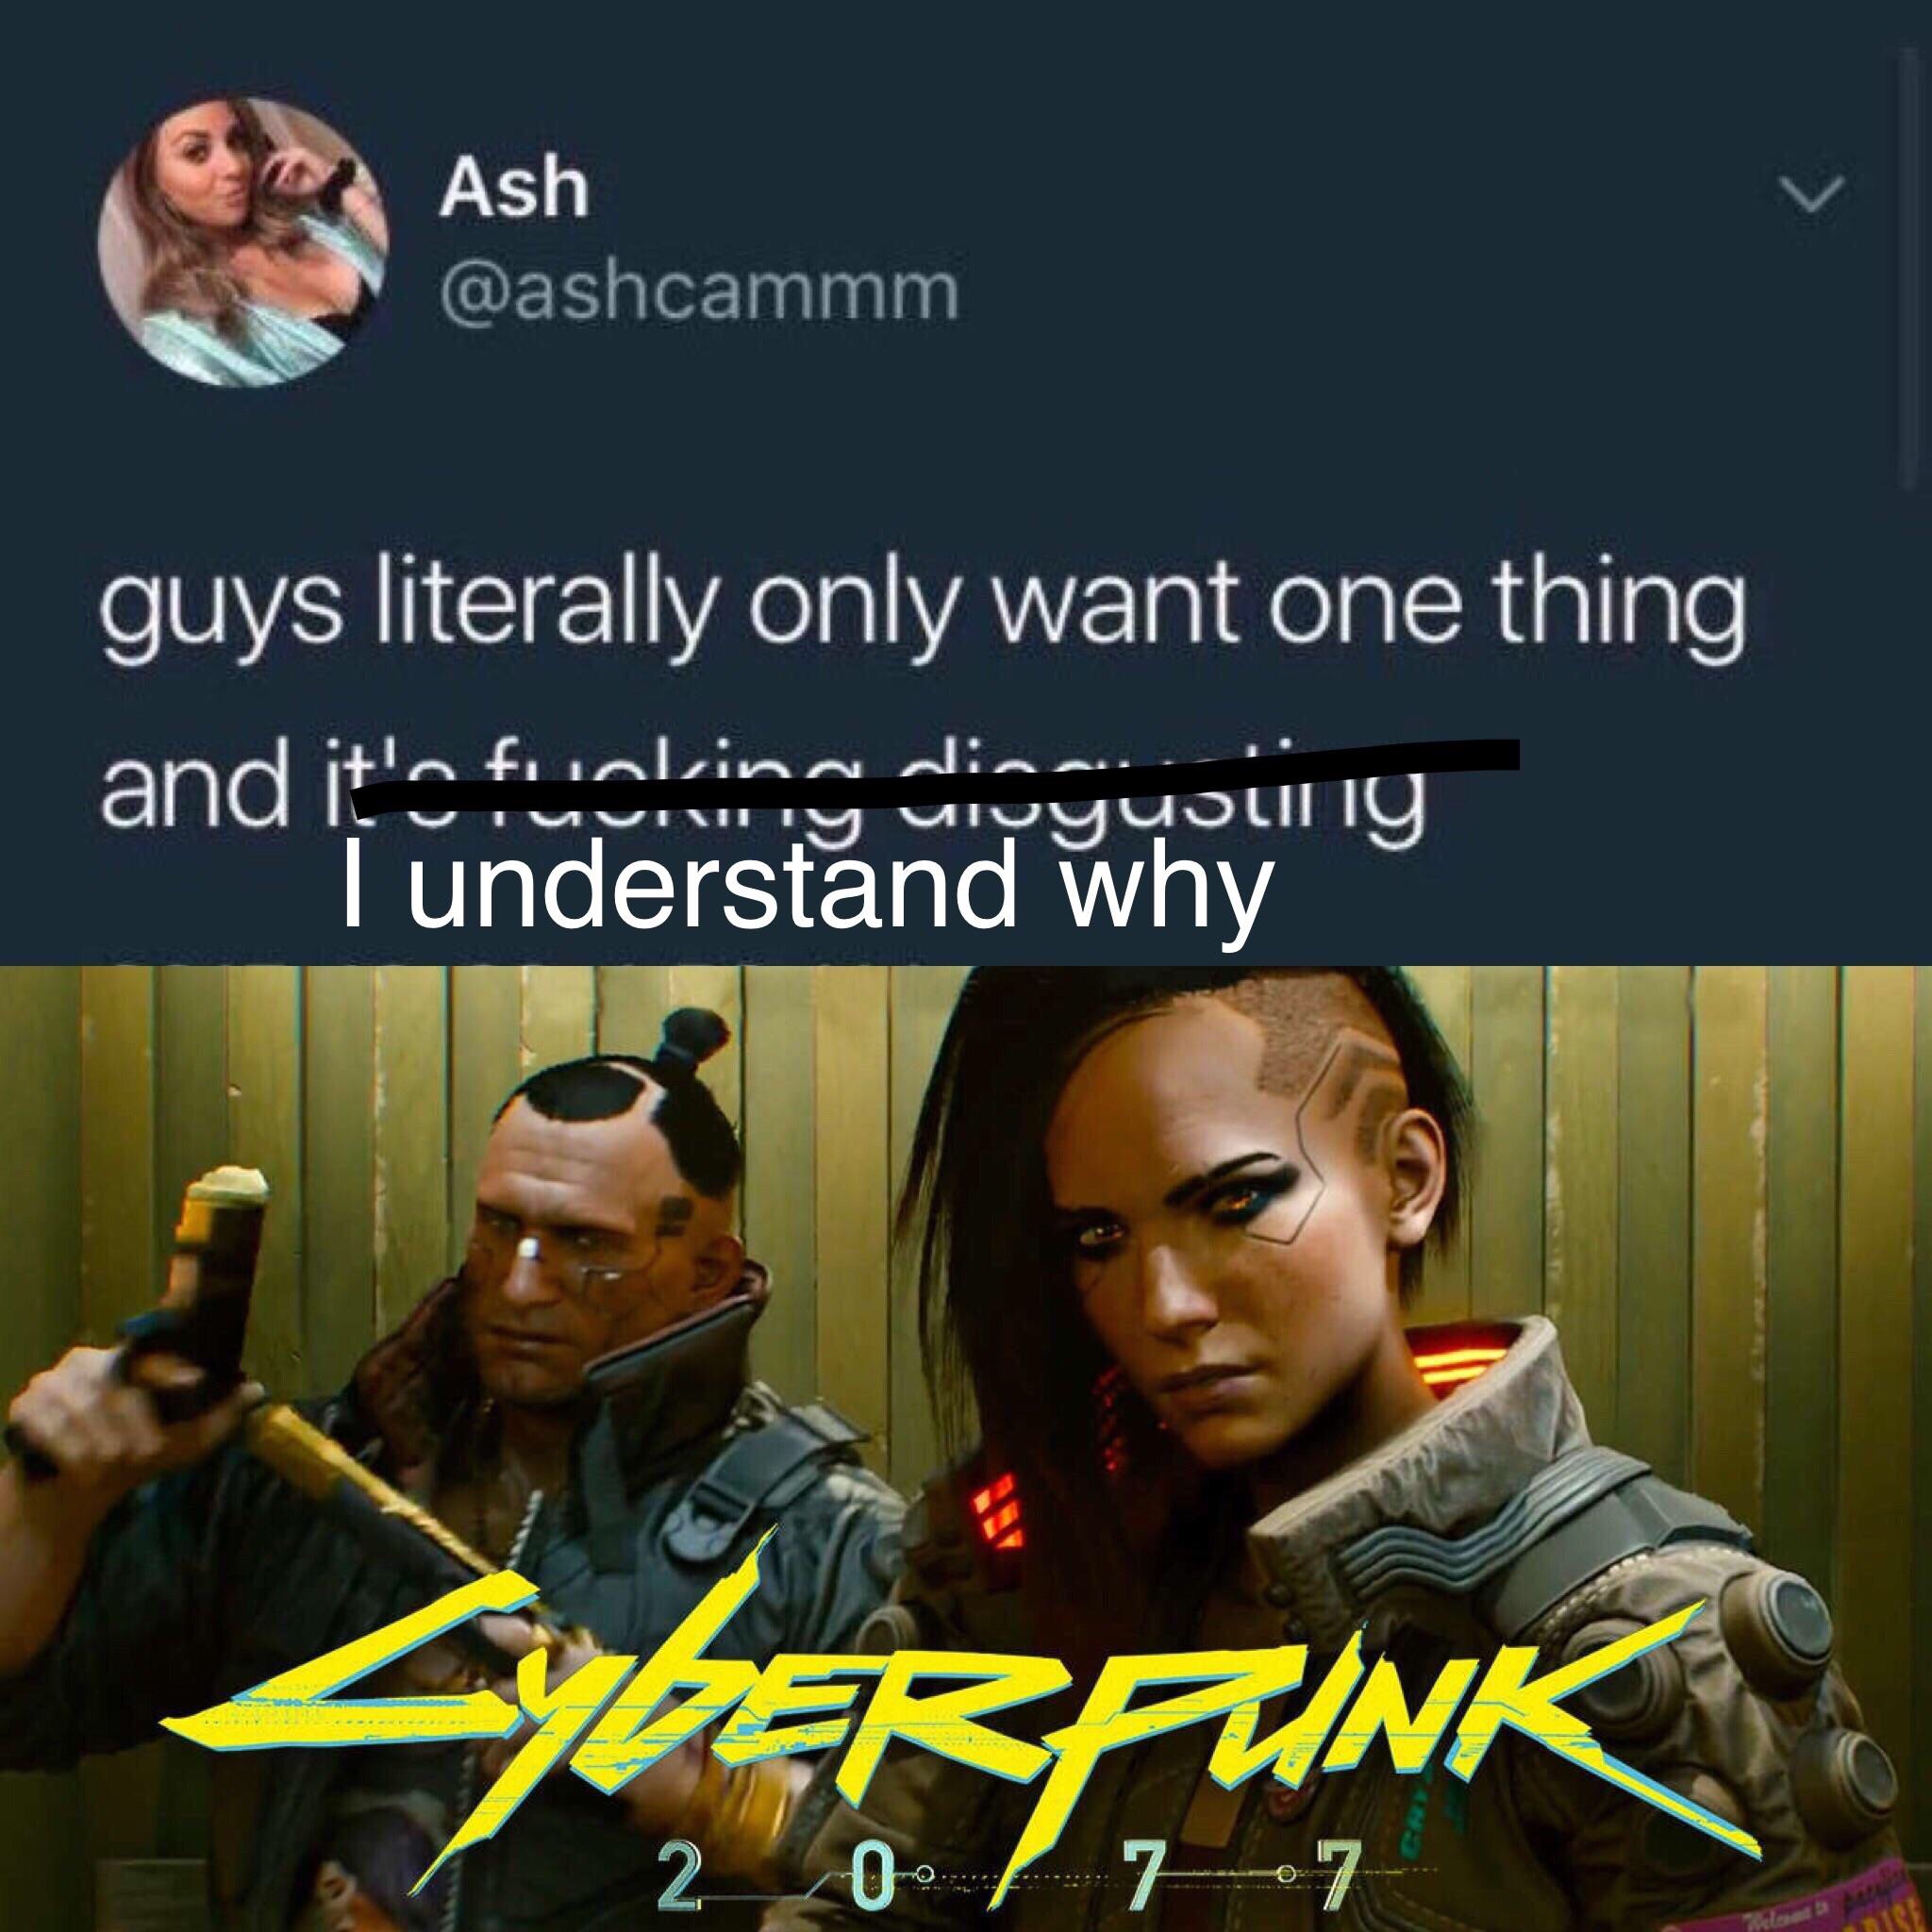 memes - cyberpunk 2077 - Ash guys literally only want one thing and it's fucking dicquoully I understand why Rfunk 0 77